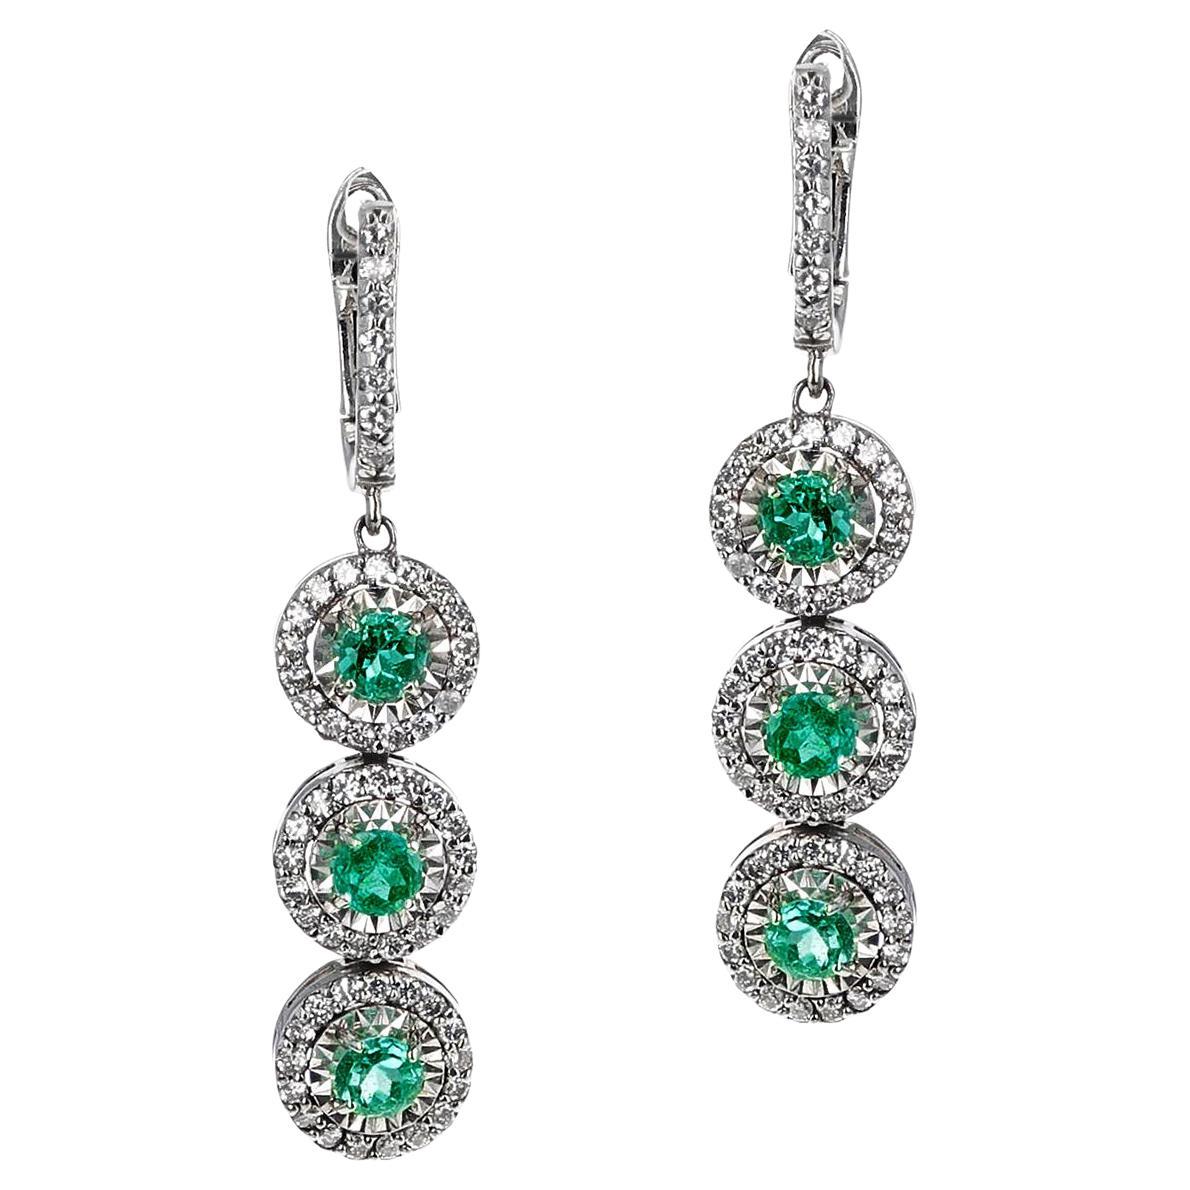 Round Emerald and 1.25 Ct. Diamond Dangling Earrings, 14K Gold